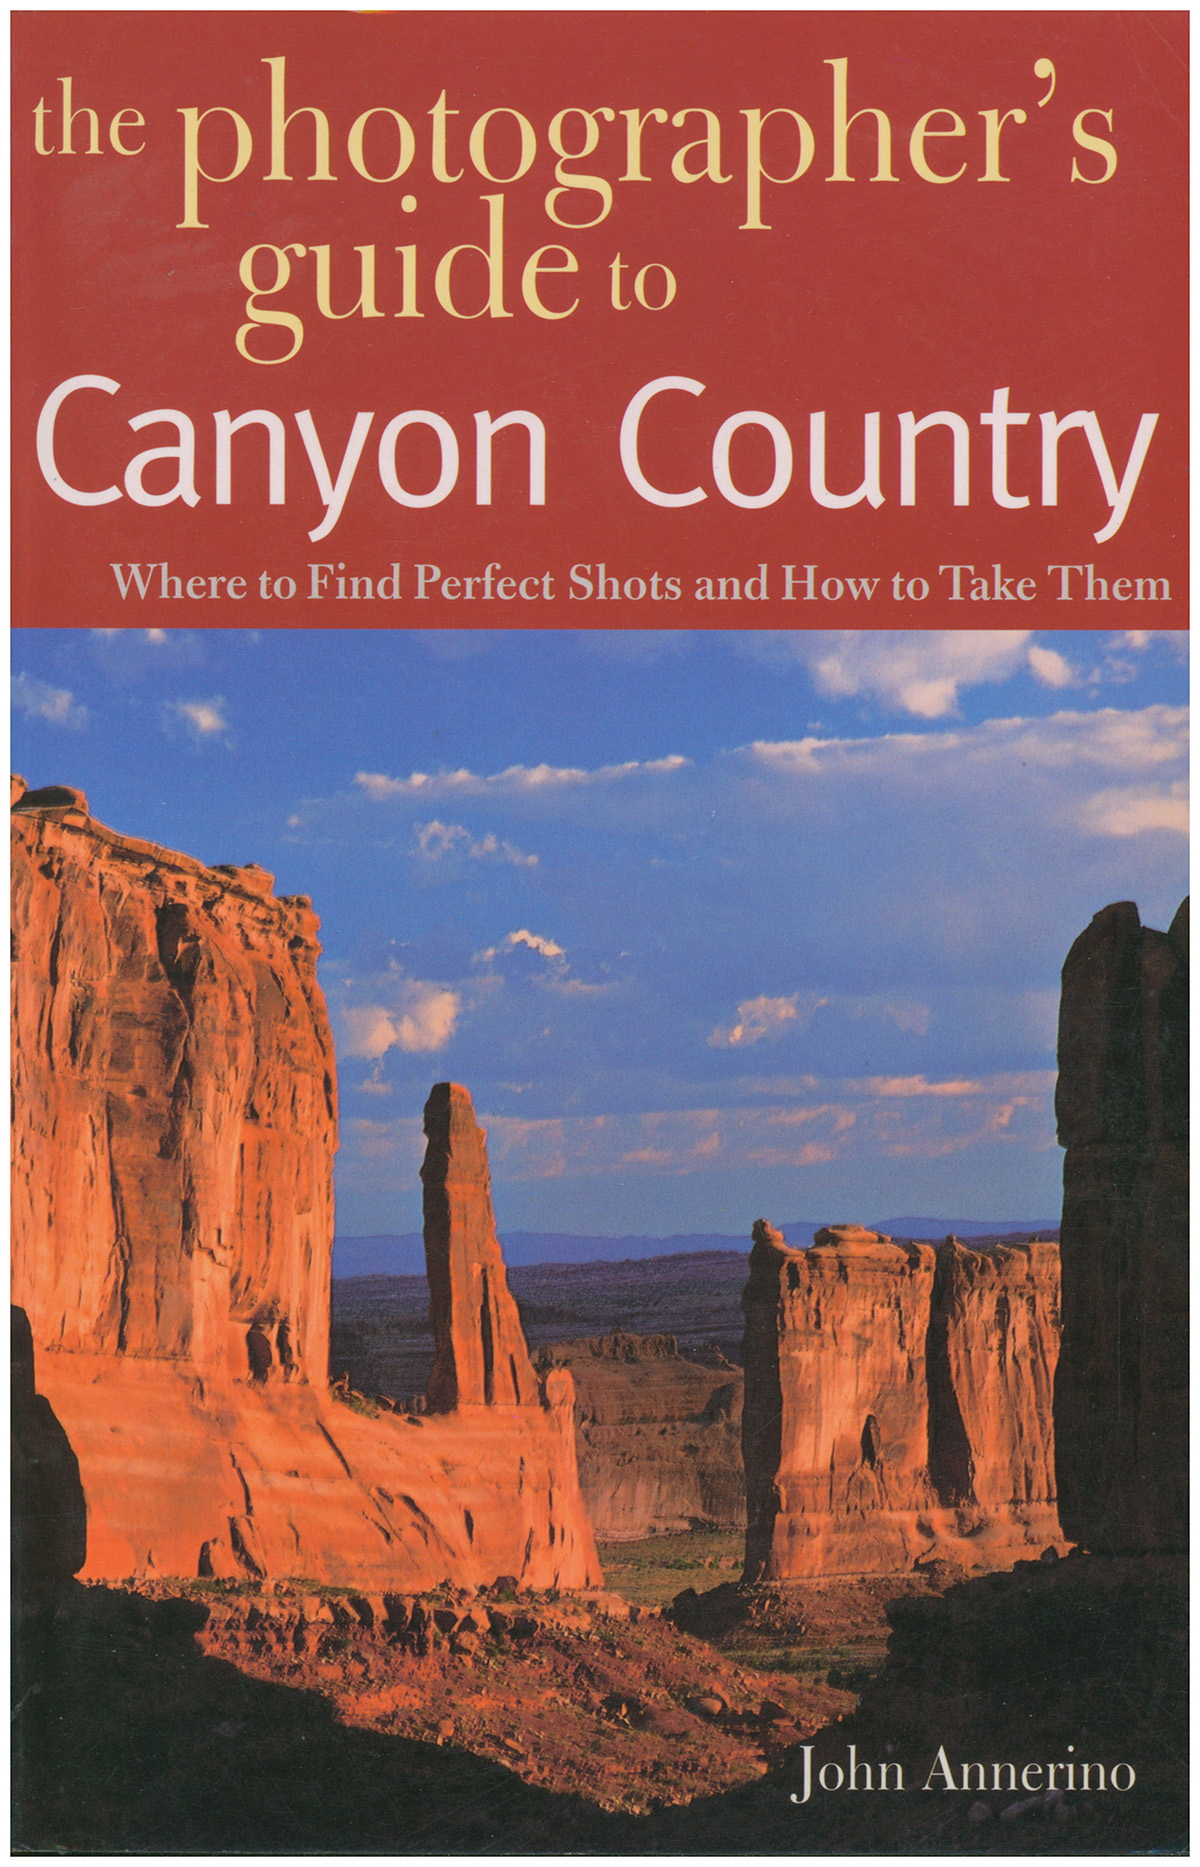 Annerino, John - The Photographer's Guide to Canyon Country: Where to Find Perfect Shots and How to Take Them